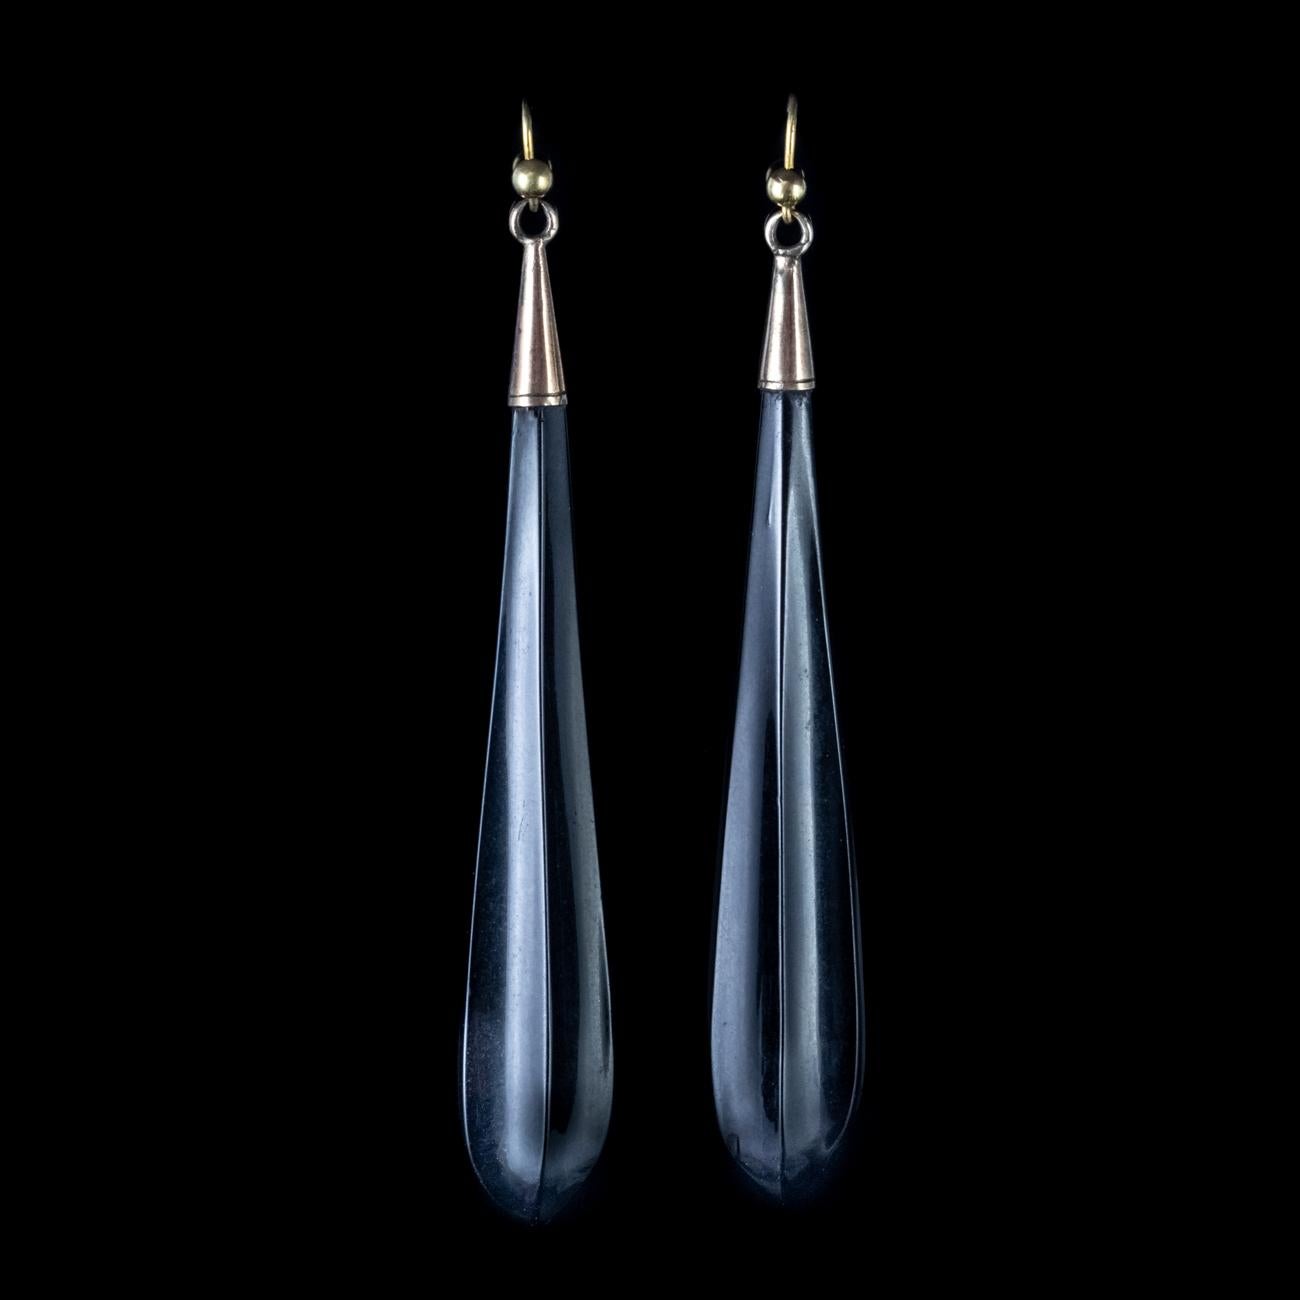 These gorgeous Antique Victorian long drop earrings have been crafted out of stunning black Whitby Jet and fitted with lovely 9ct wire hooks.

Whitby Jet was brought to the attention of the world by Queen Victoria who used Whitby Jet as part of her